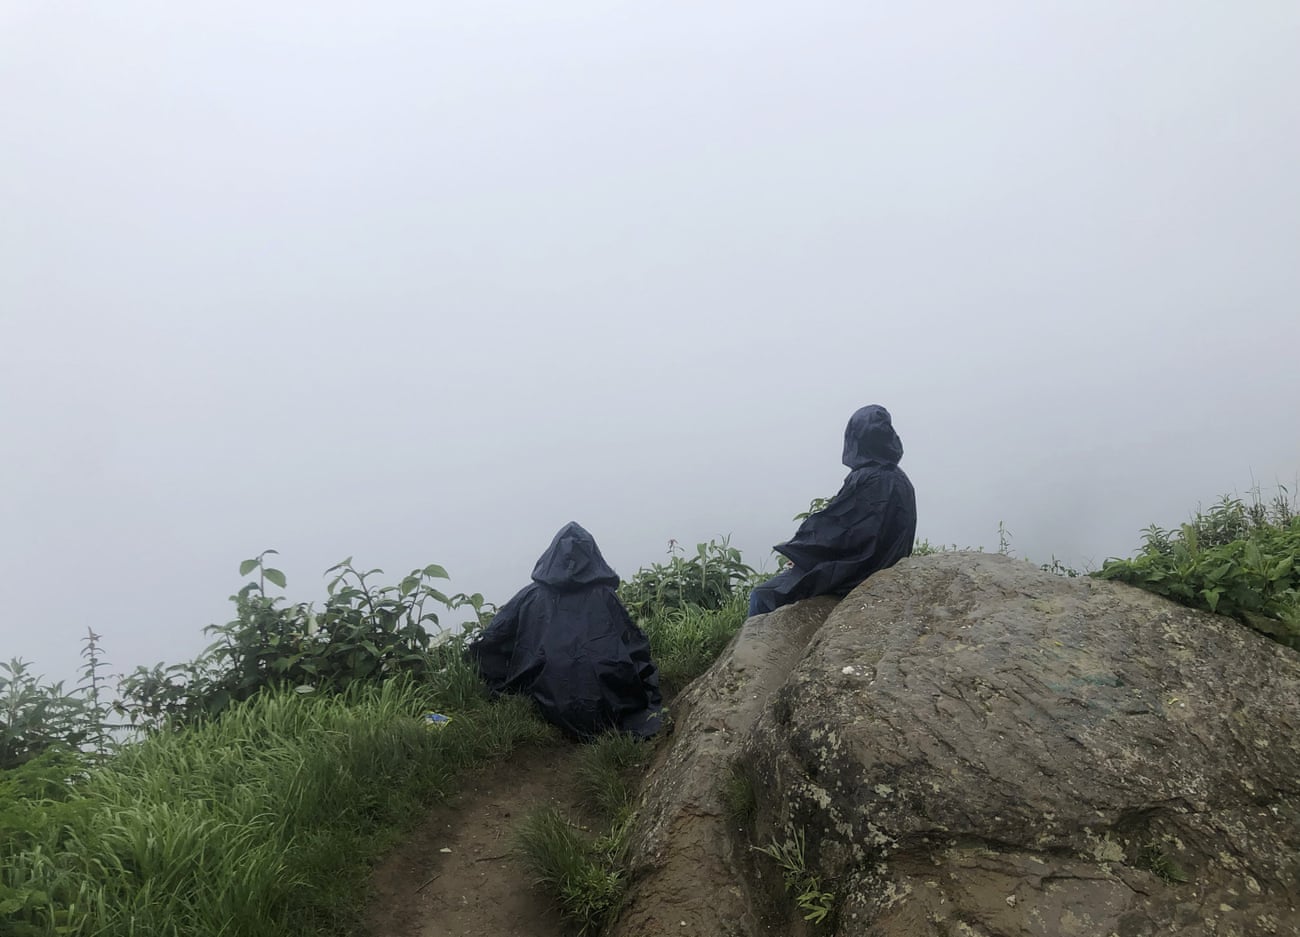 A mother and daughter look out into the clouds over the Dzukou valley, along the Nagaland-Manipur state border, India